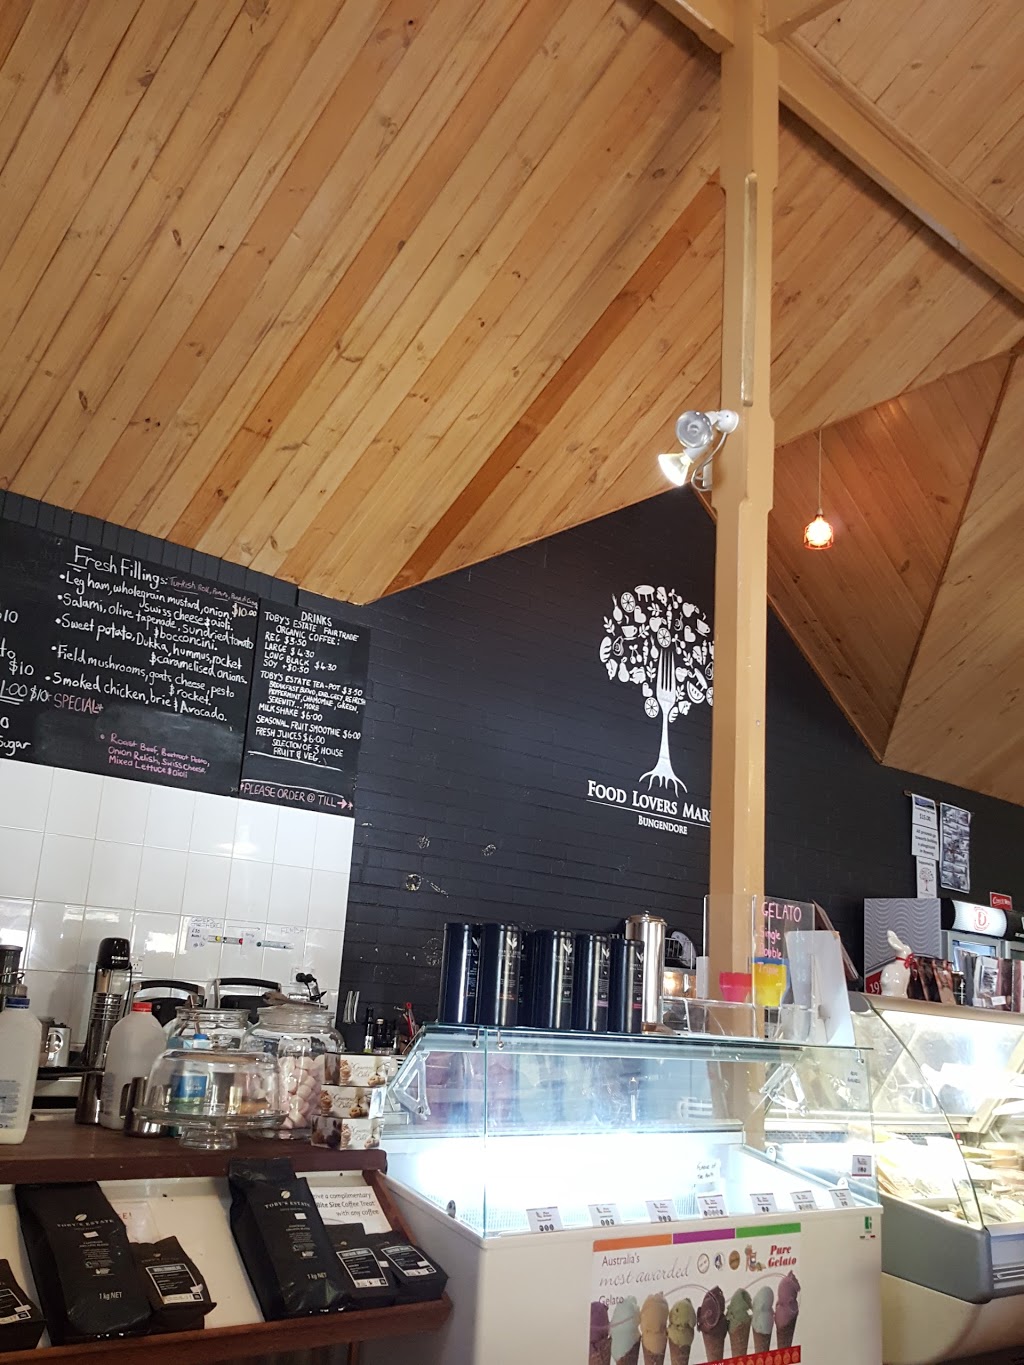 Bungendore Food  Lovers  Caf  and Market Cafe  50 